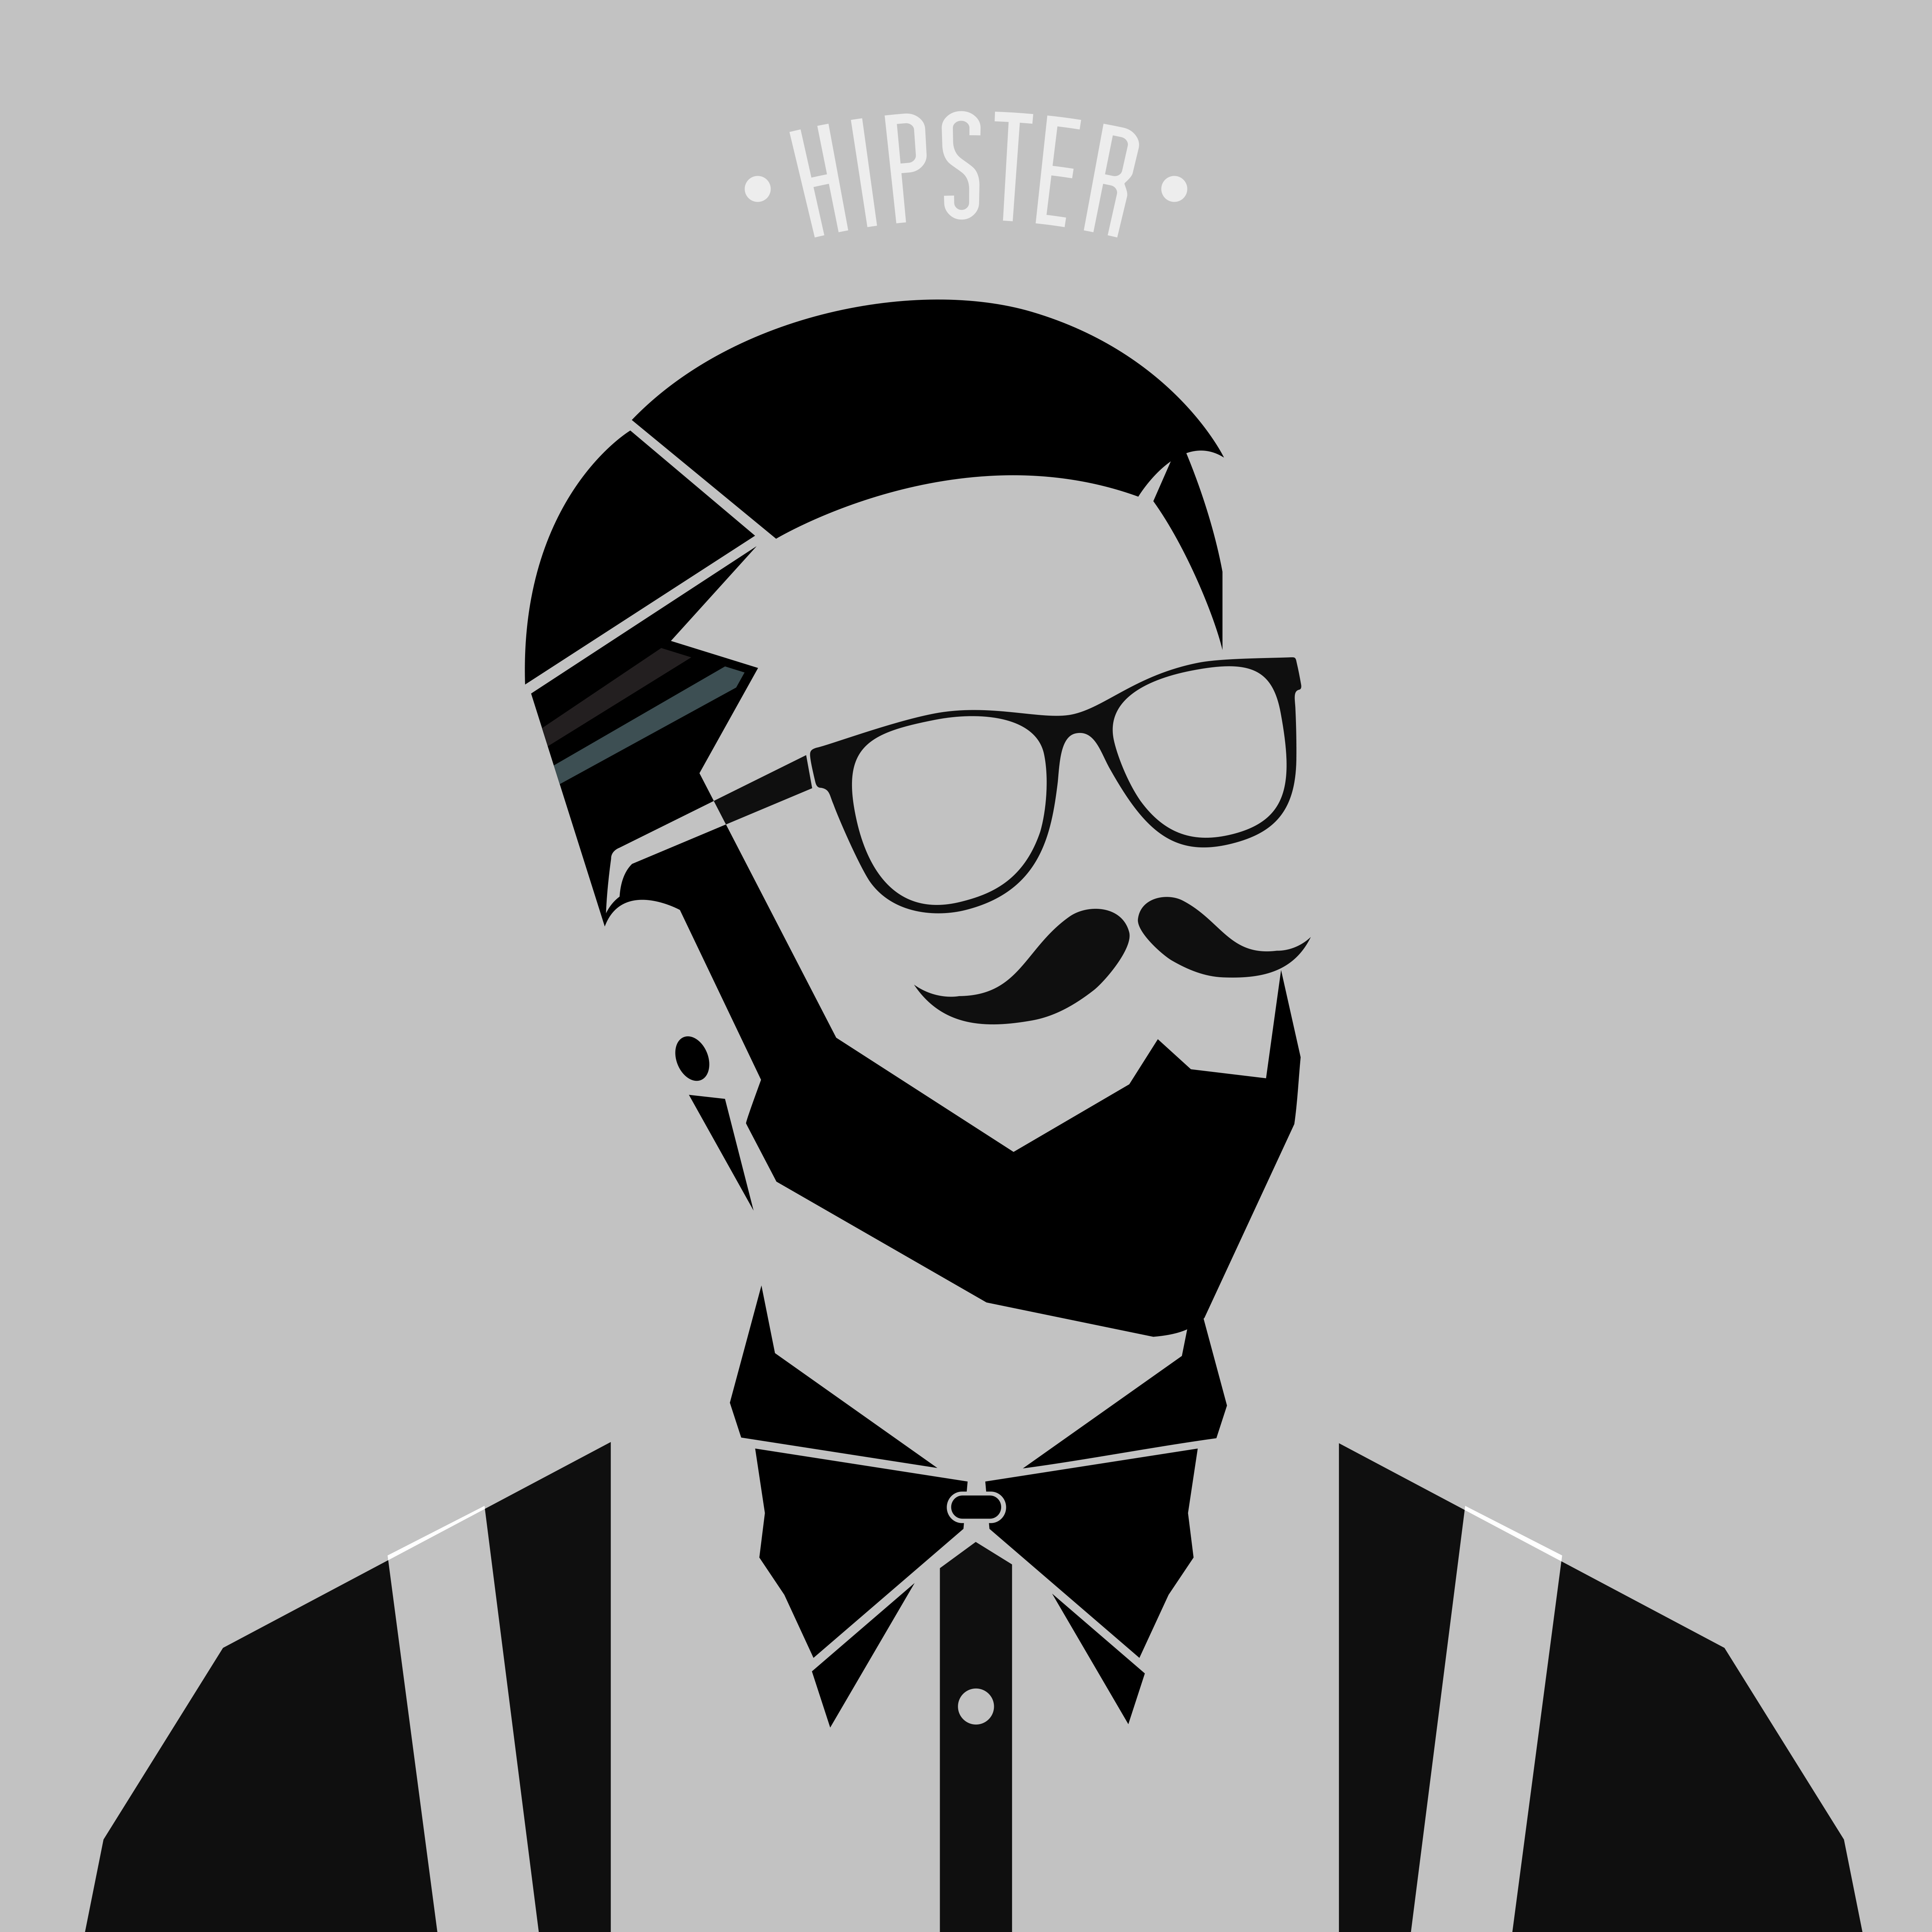 Hipster men style - Download Free Vectors, Clipart 